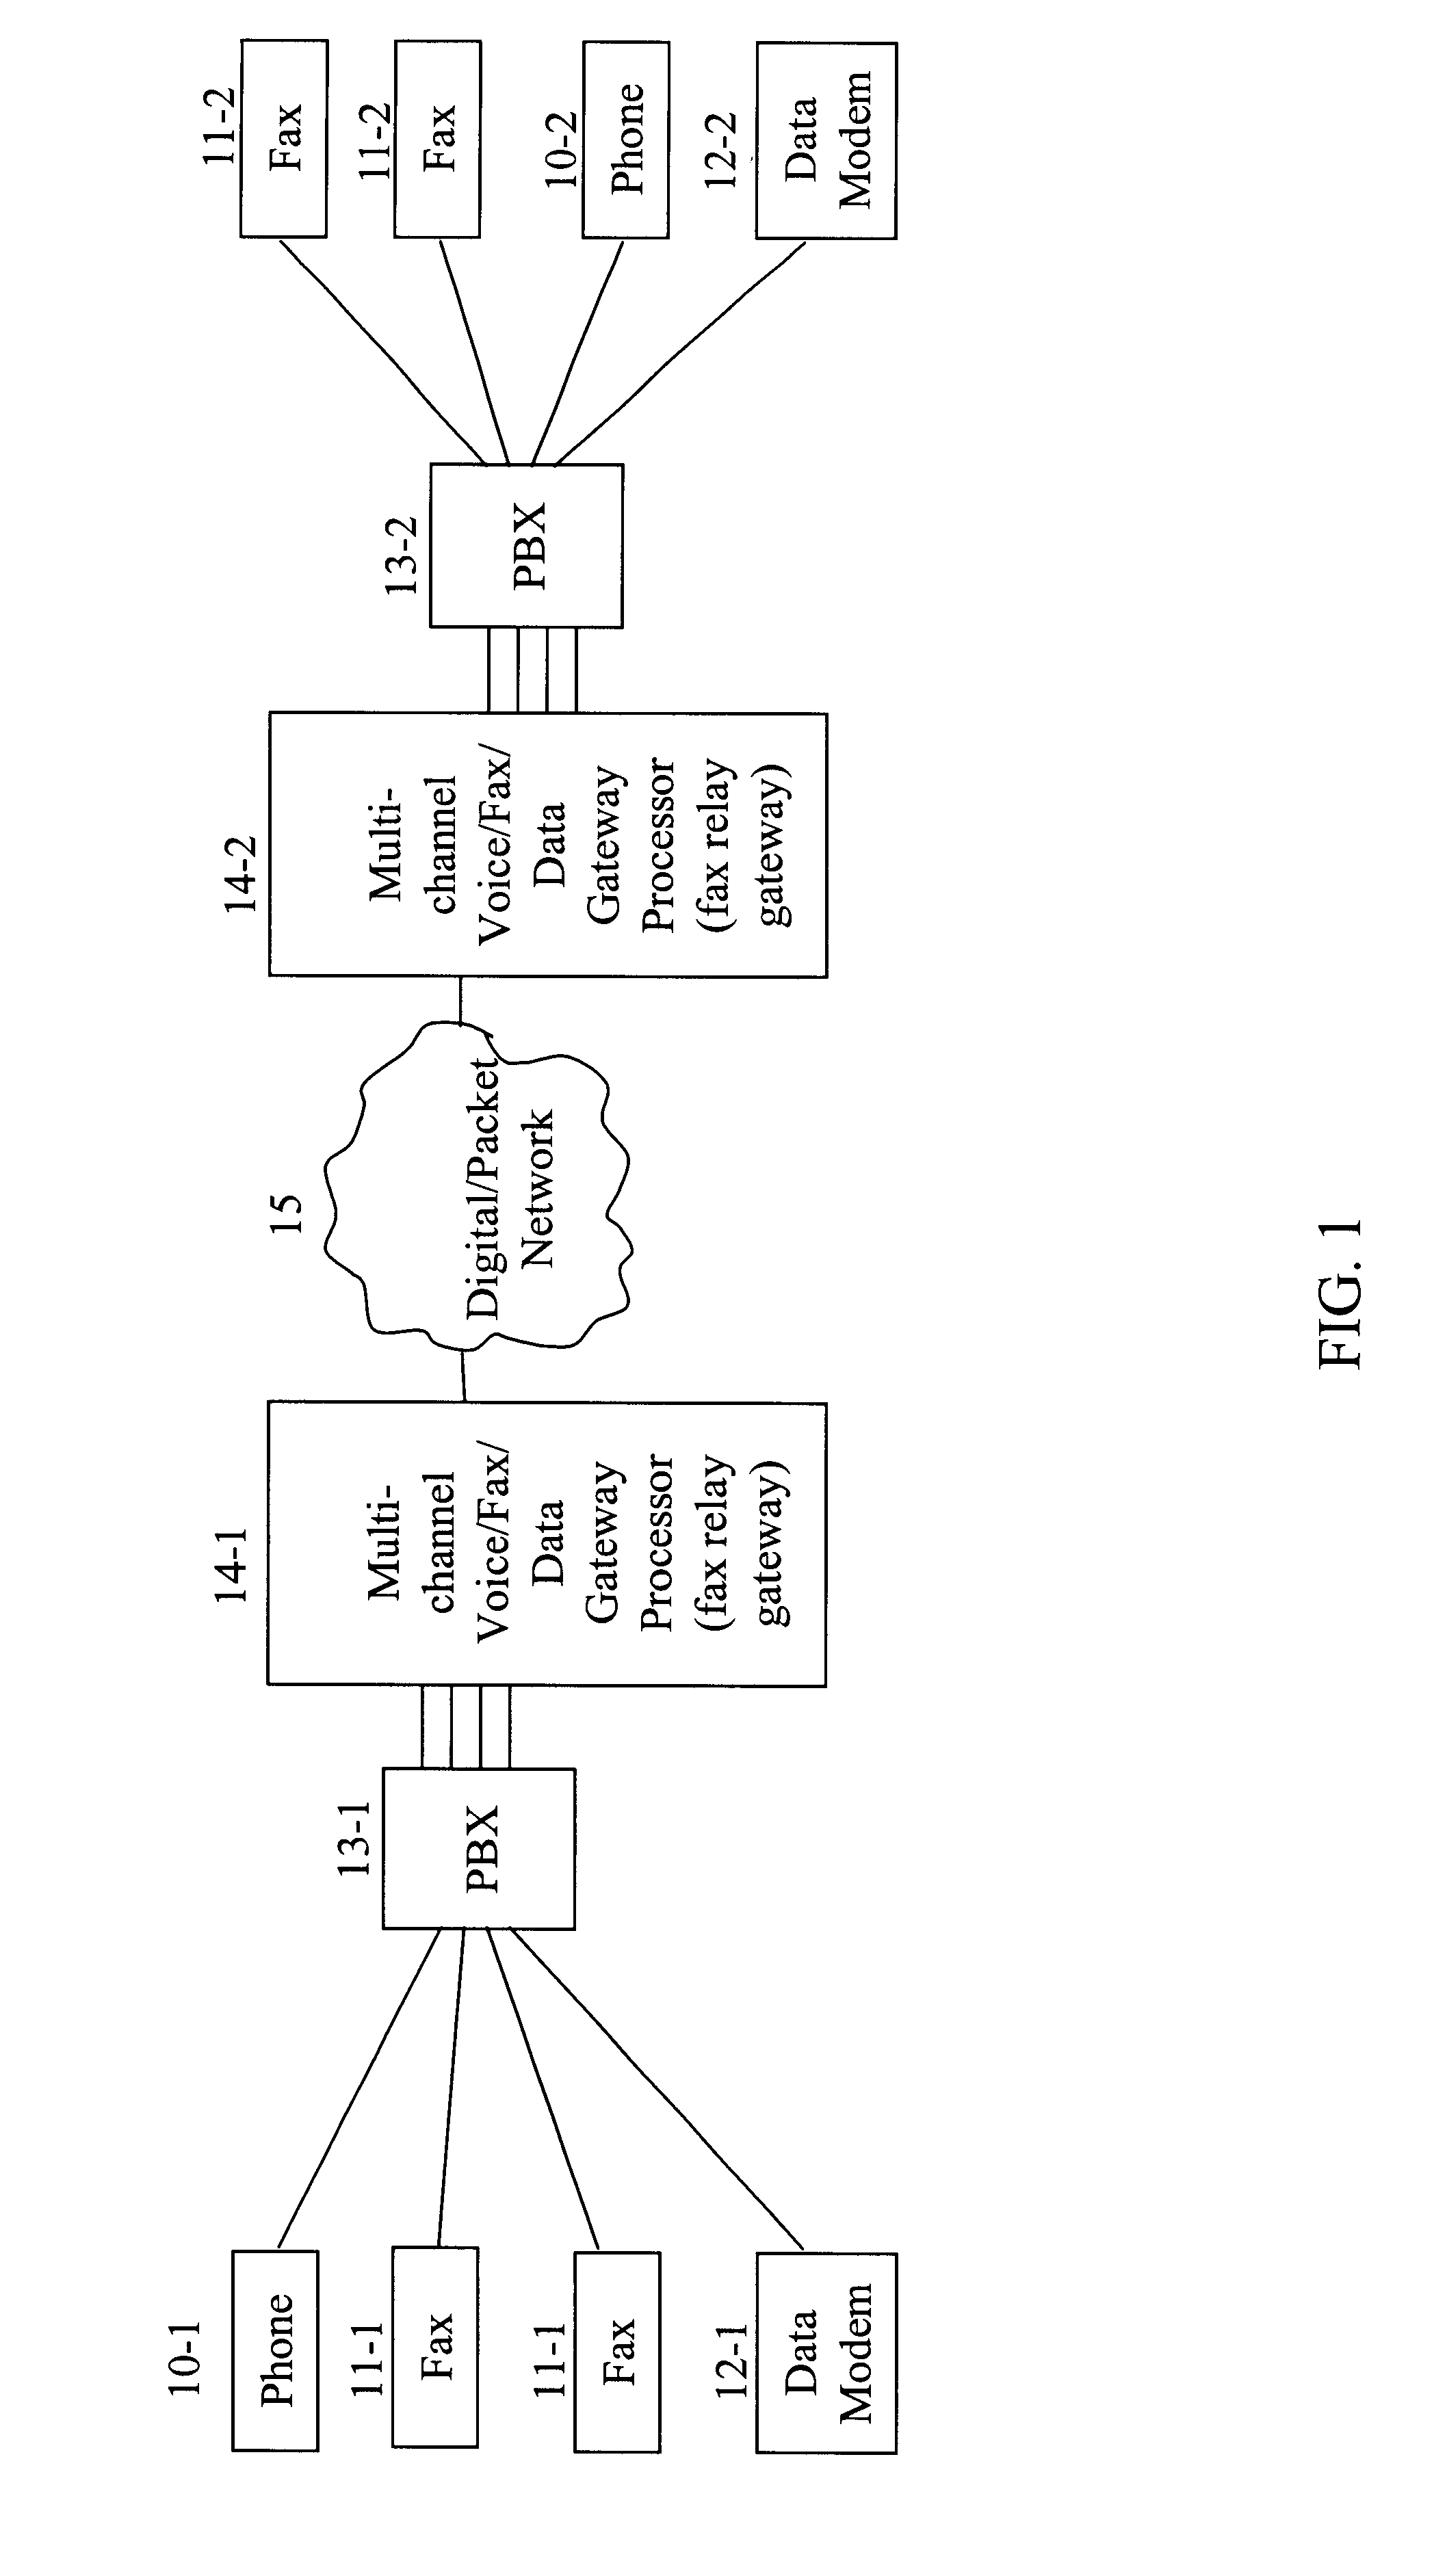 Method and system for optimized facsimile transmission speed over a bandwidth limited network